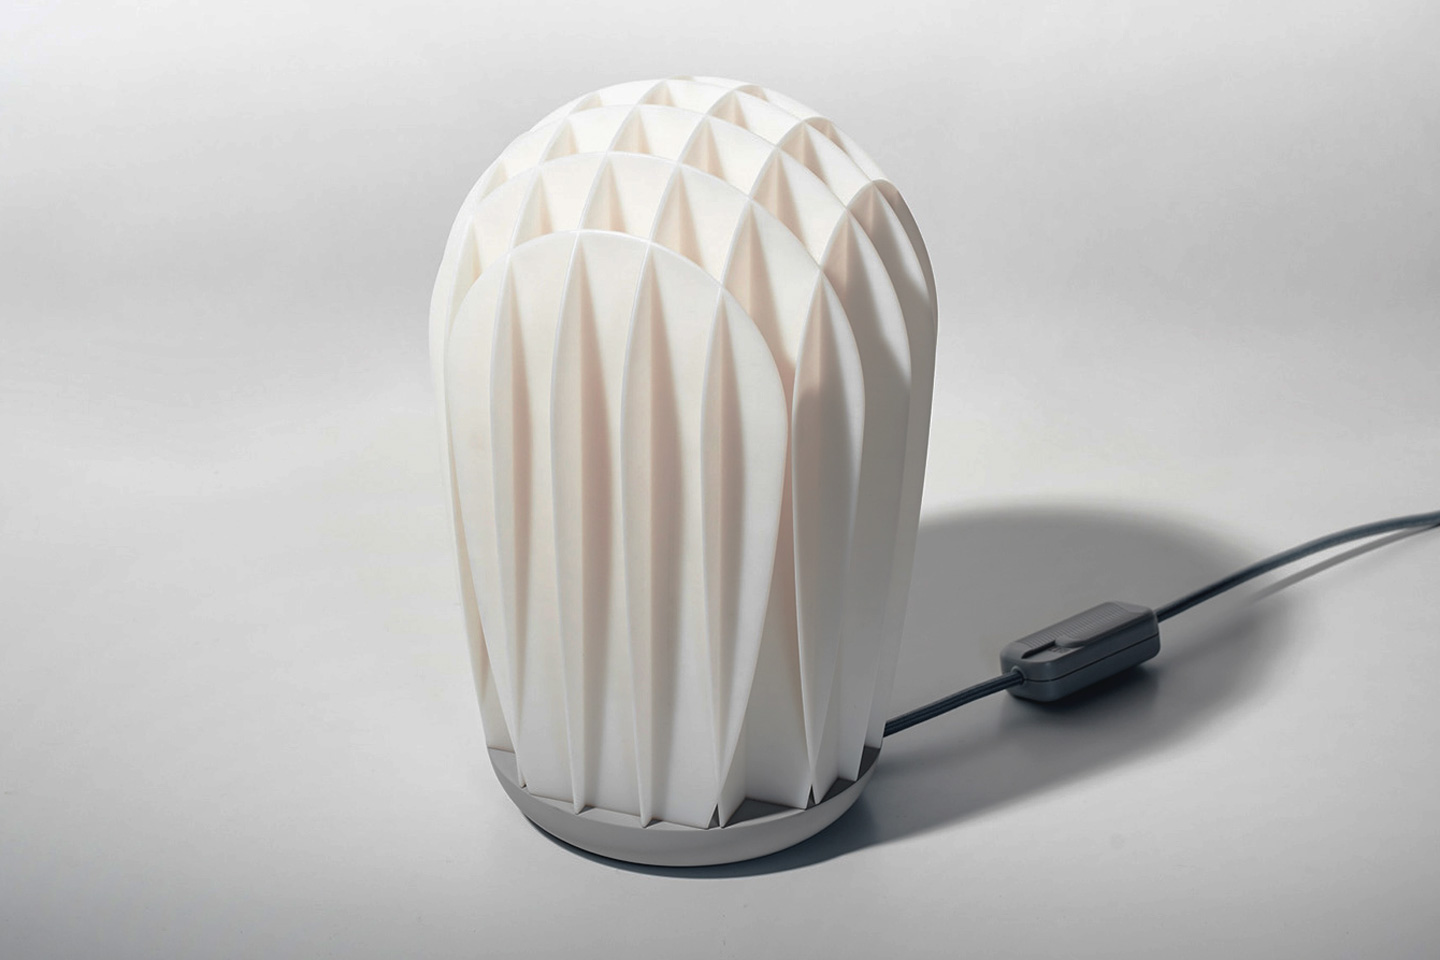 #Gantri’s 3D-printed Sopp Table Lamp visually explores the idea of ‘Less Is More’